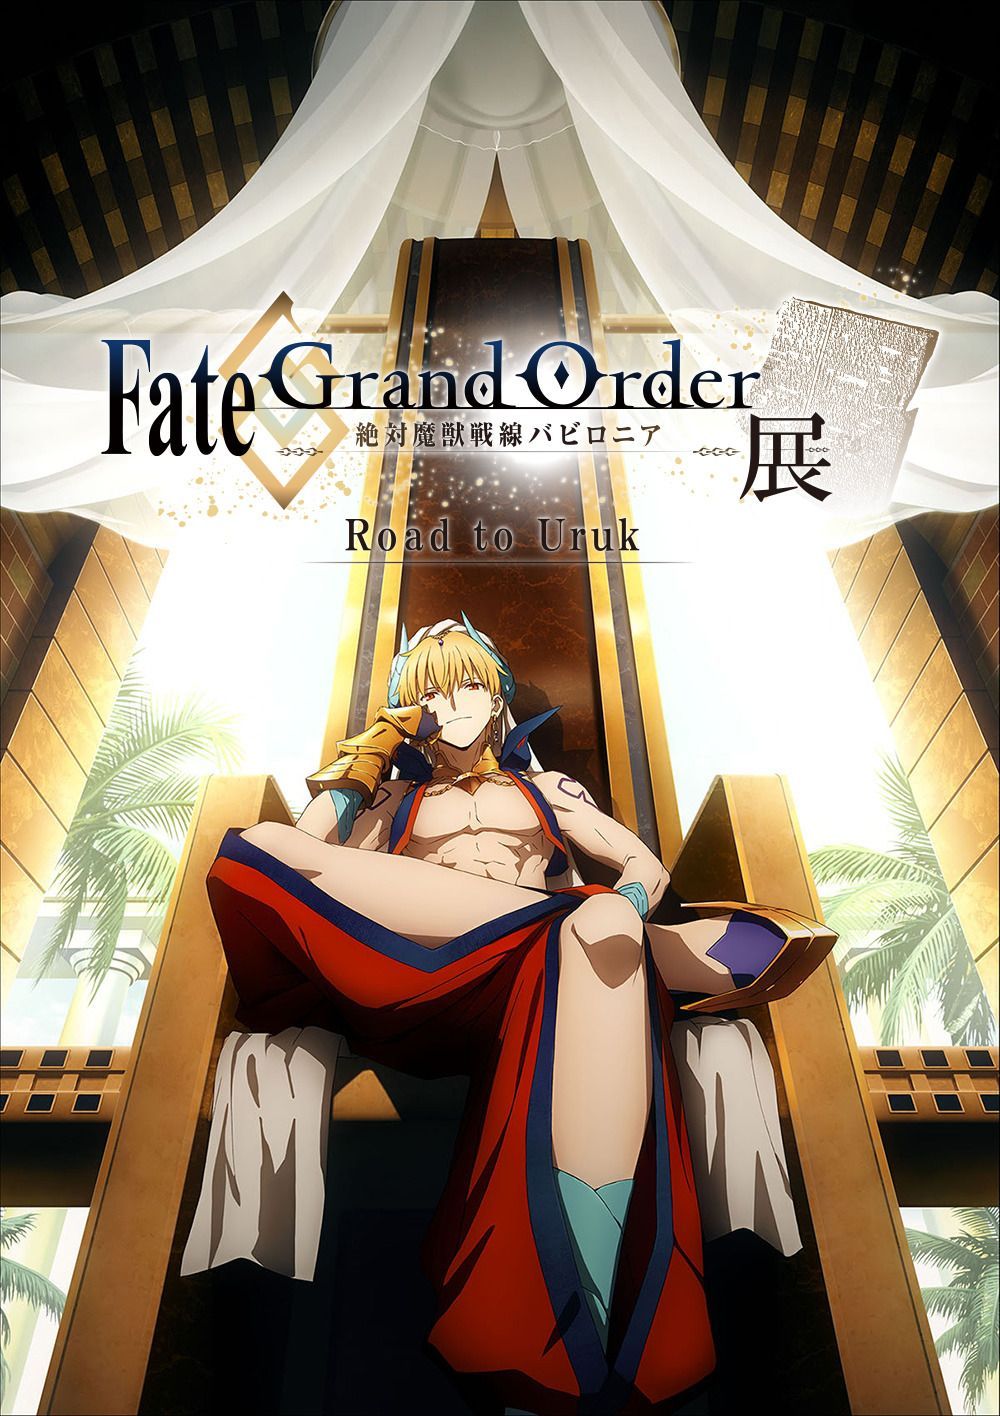 Fate Grand Order Absolute Demonic Front: Babylonia Anime. Gilgamesh Fate, Fate Anime Series, Fate Stay Night